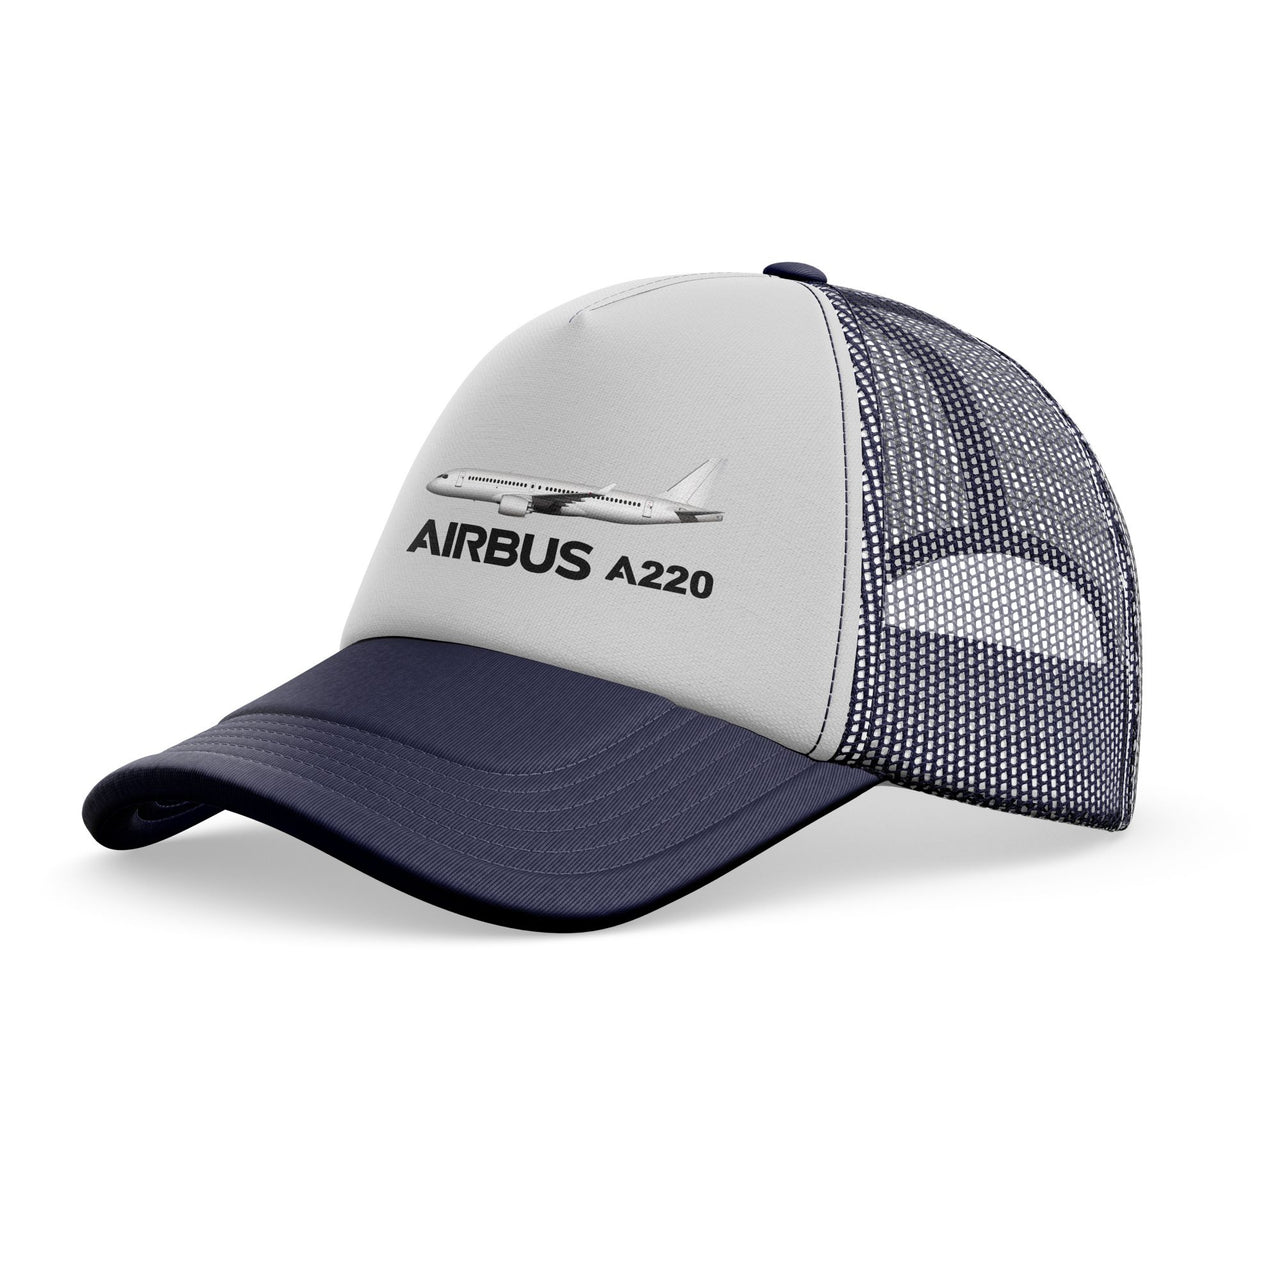 The Airbus A220 Designed Trucker Caps & Hats